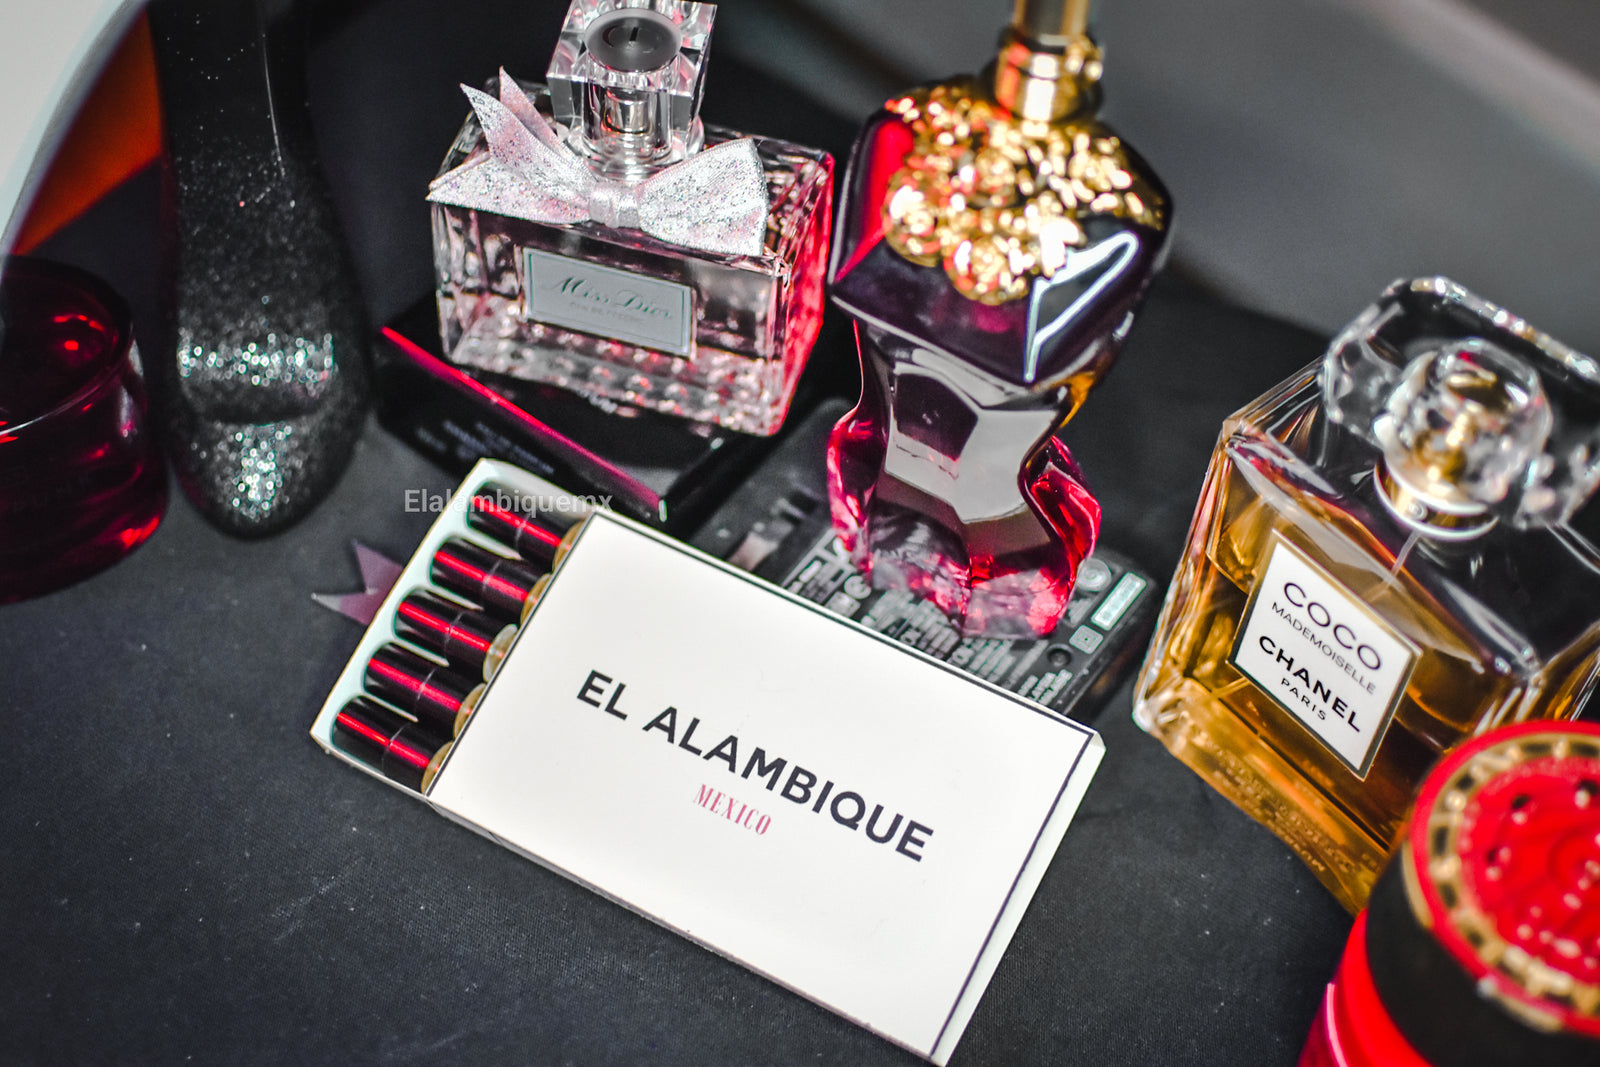 CHANEL Coco Mademoiselle - Alambique Parfums